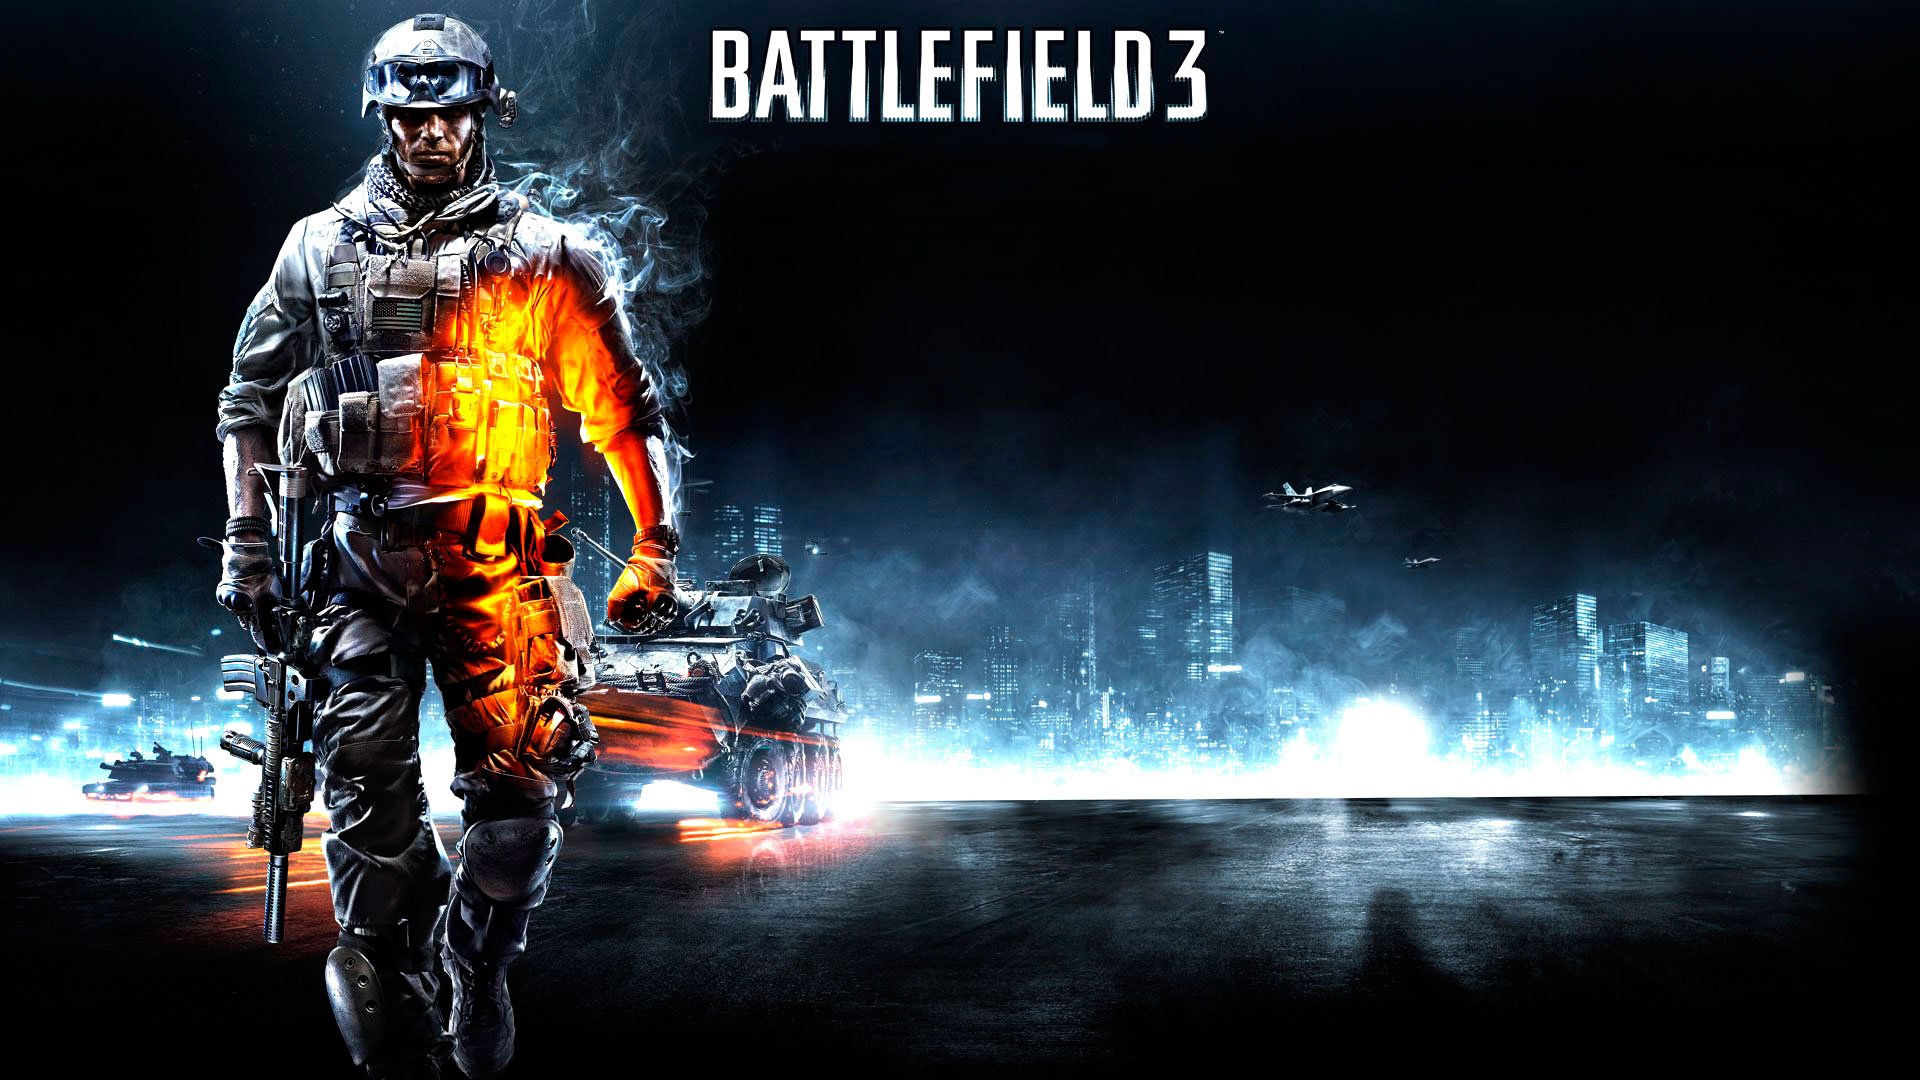 Battlefield 3 Wallpapers in HD High Resolution Page 5